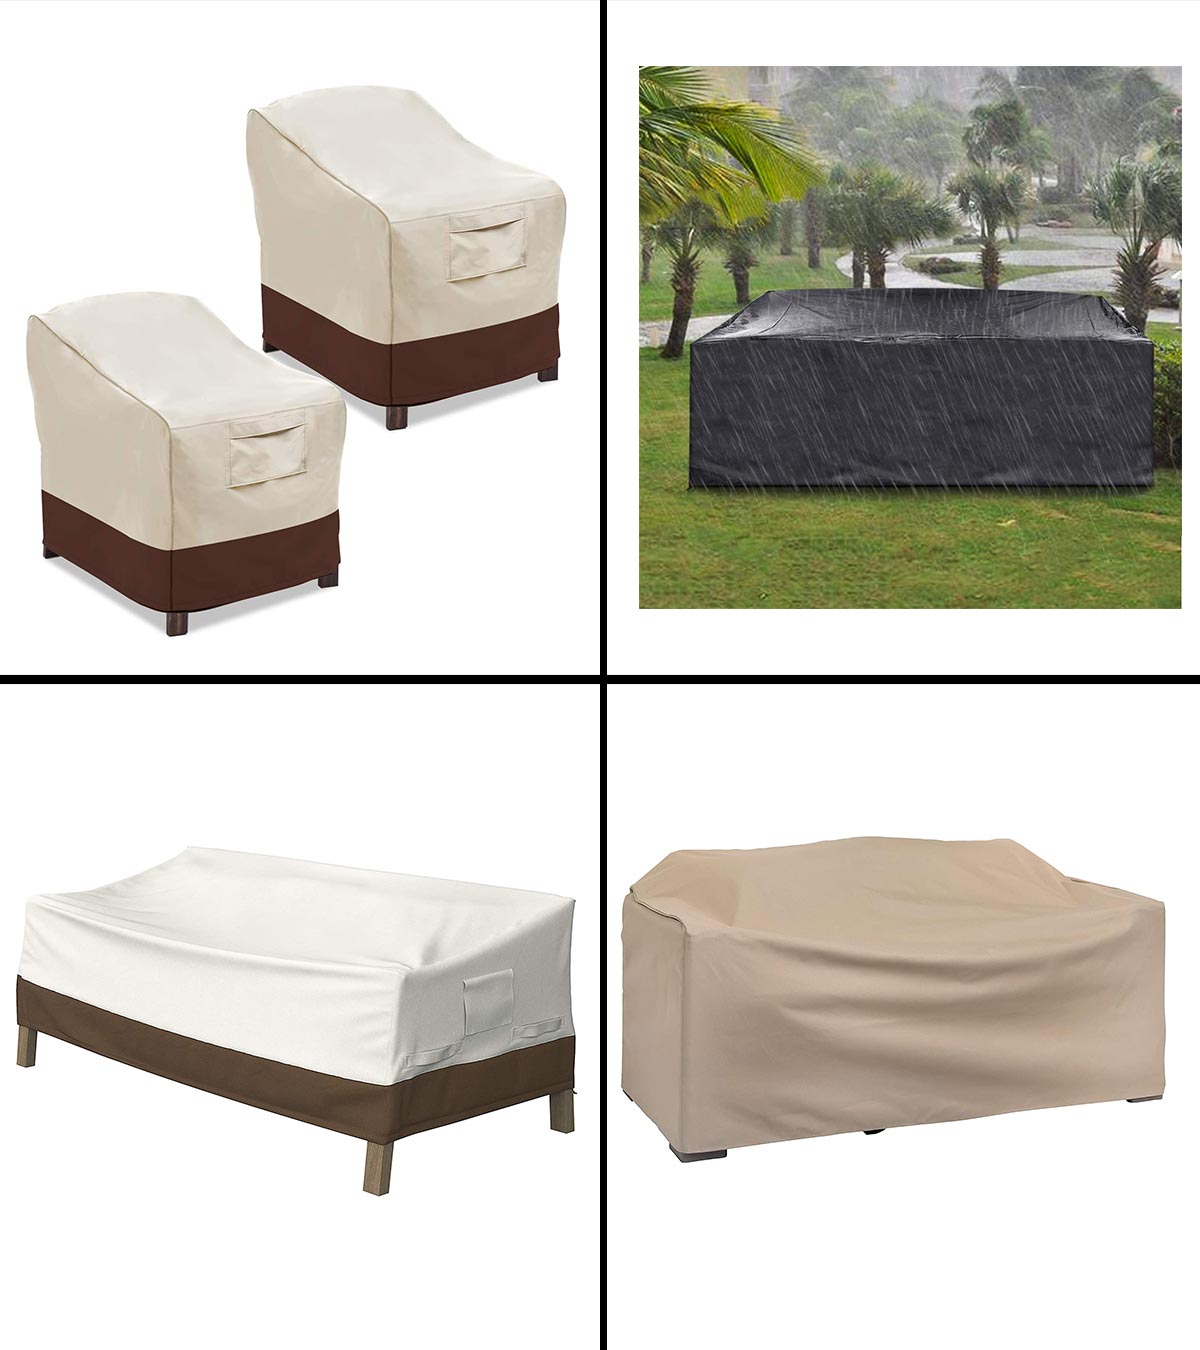 Durable Oxford Fabric Outdoor Round Table Cover 96 Dia x 28 H Beige & Brown Waterproof Tuyeho Round Patio Furniture Cover UV & Rip Resistant Patio Table and Chairs Set Cover 